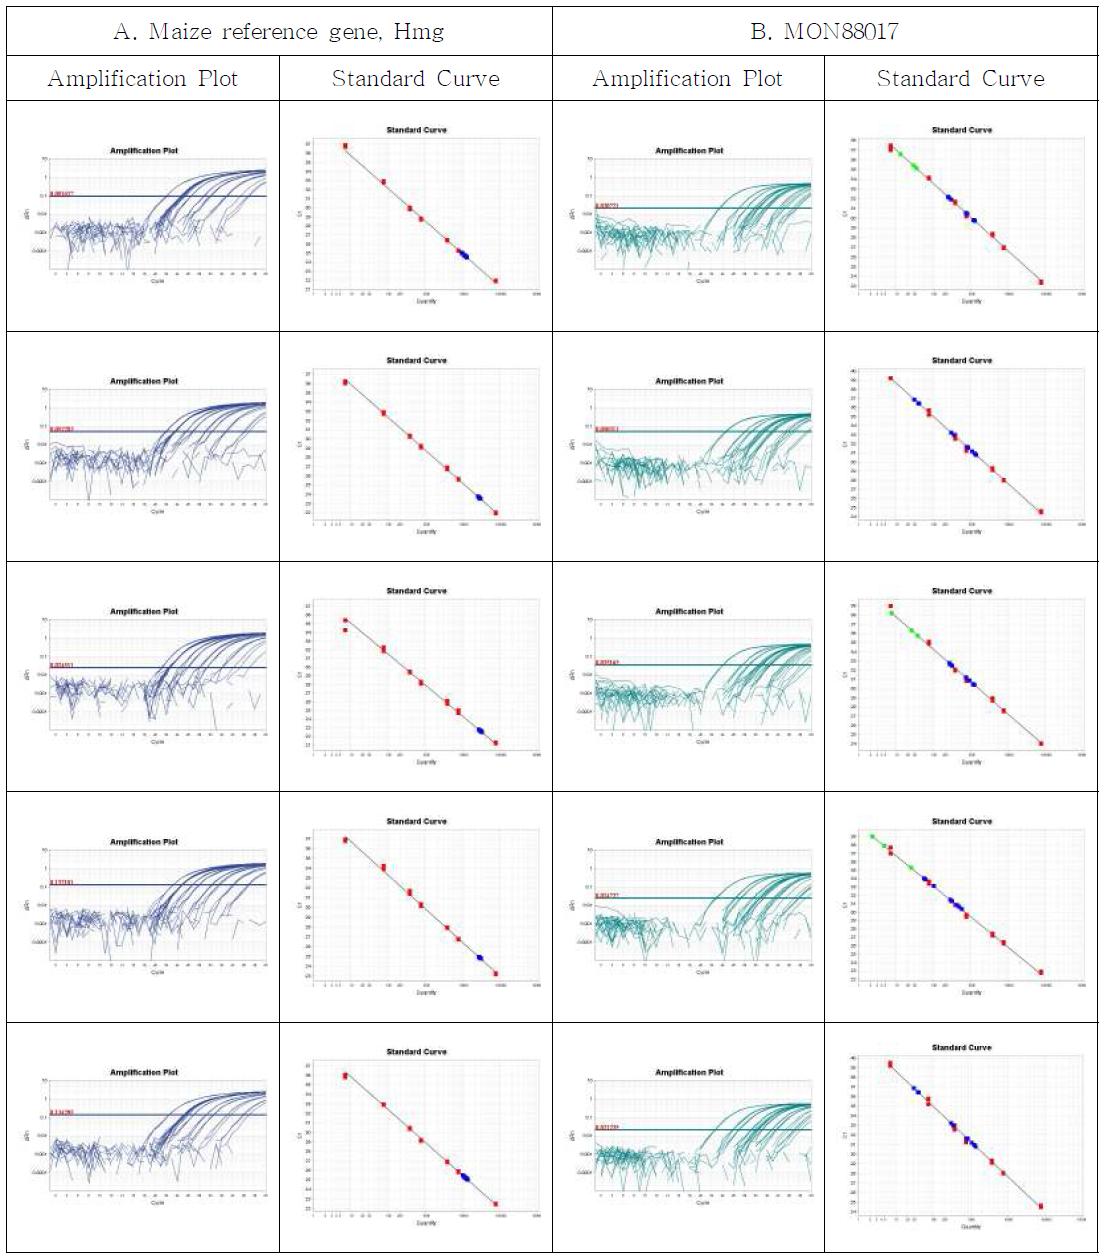 Amplification plots and standard curves for MON88017 event-specific quantitative Real-time PCR method using gradient-diluted MON88017 CRM genomic DNA as the template, performed by Lab. 2. A. Amplification graph and standard curves for the maize reference gene, Hmg assay. B. Amplification graph and standard curves for the MON88017-event specific assay.